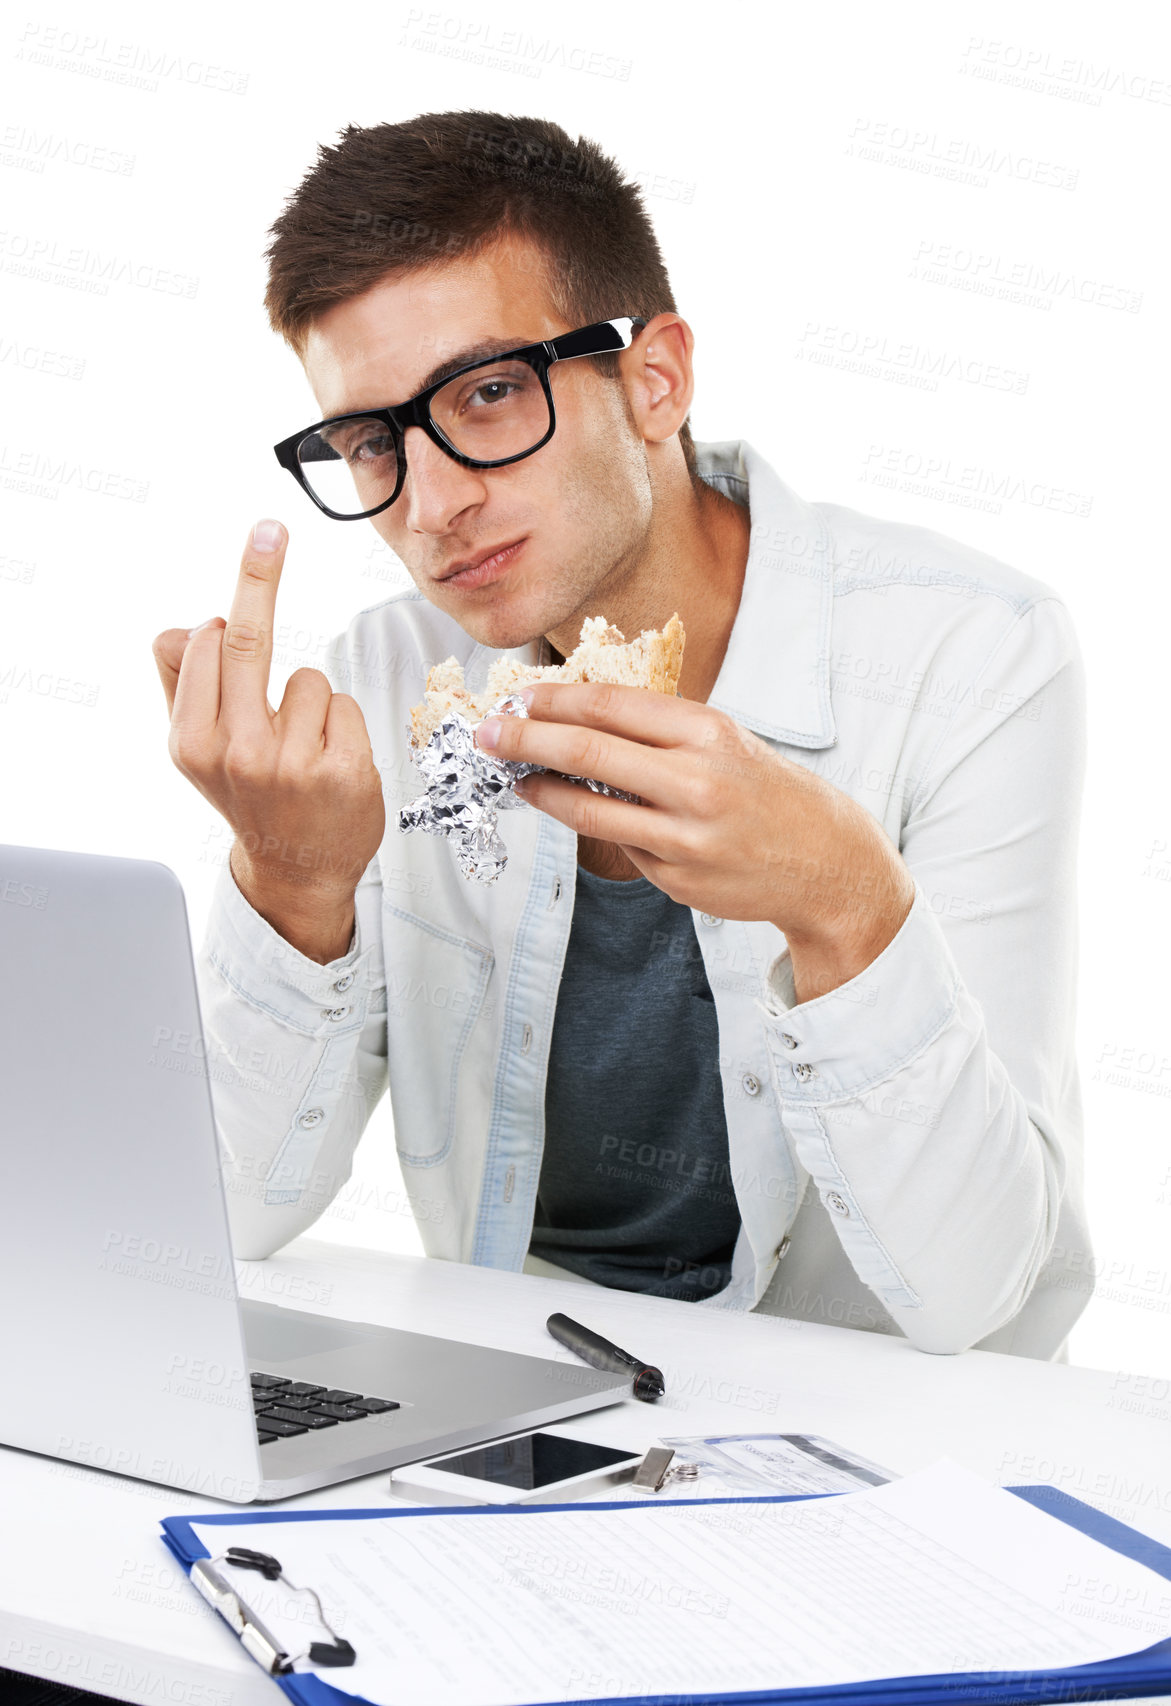 Buy stock photo Portrait of man, eating lunch and middle finger in studio isolated on a white background. Business person, sandwich and hand gesture at desk on laptop with rude sign, conflict expression and emoji